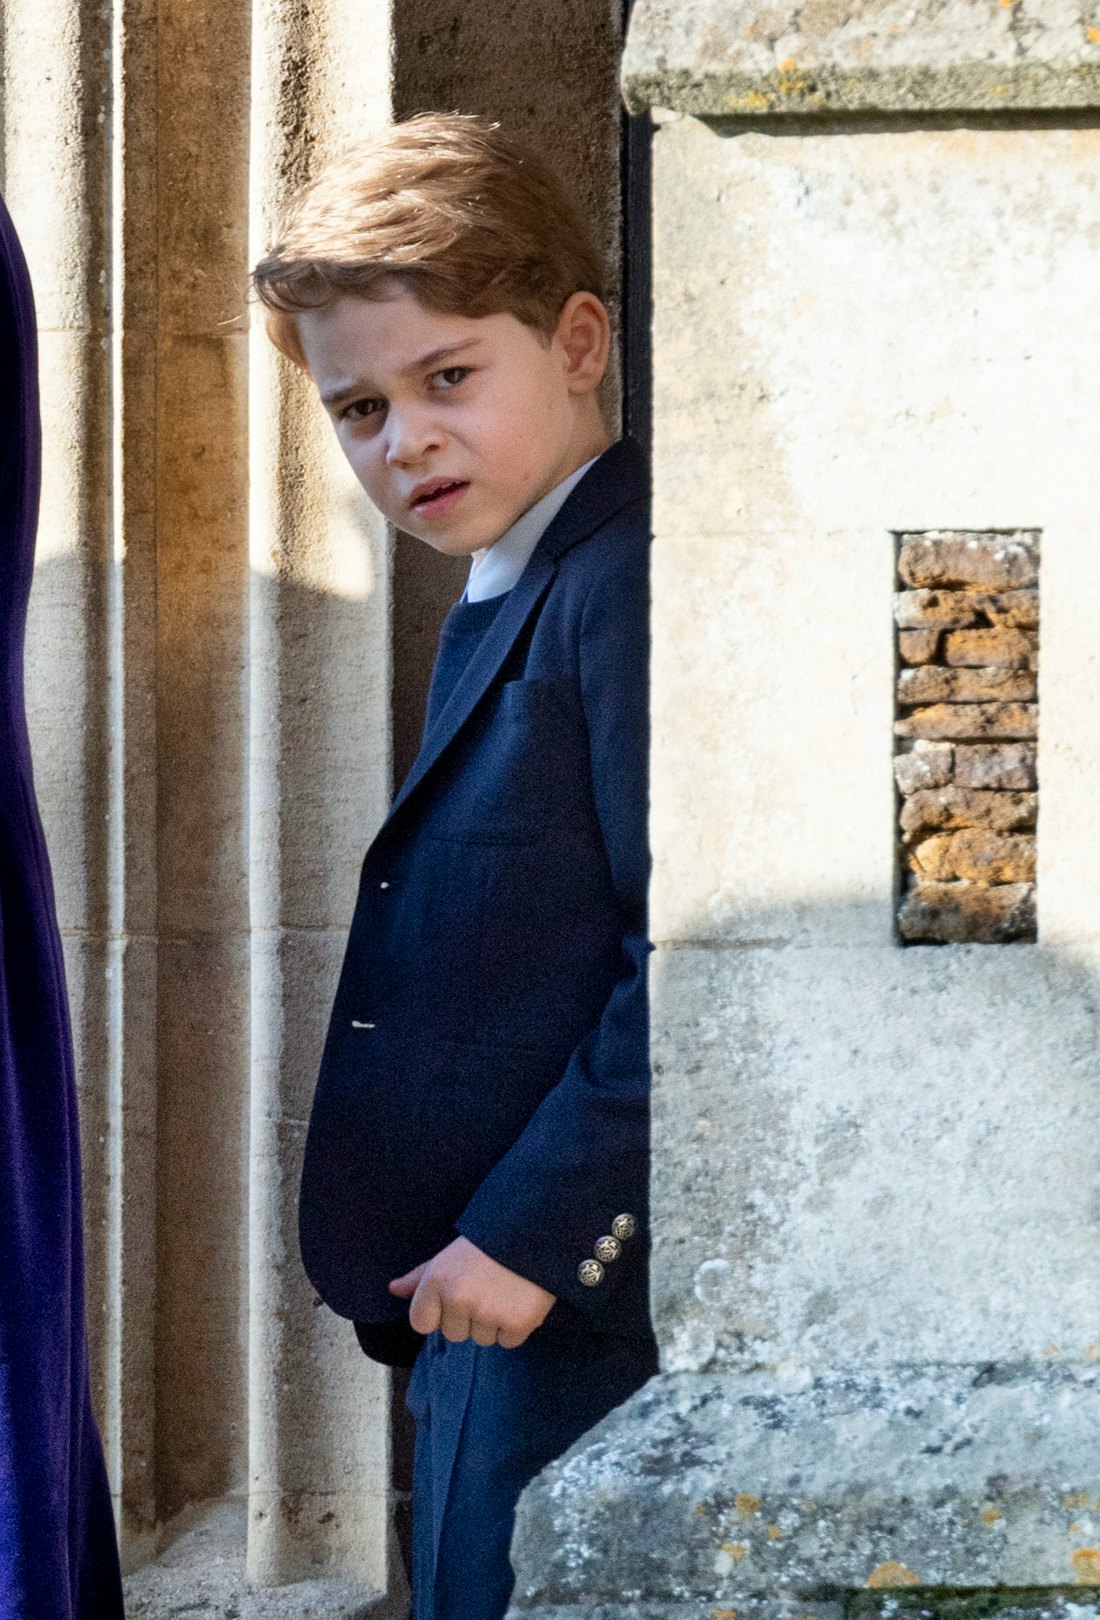 Prince George is third in line to the throne.